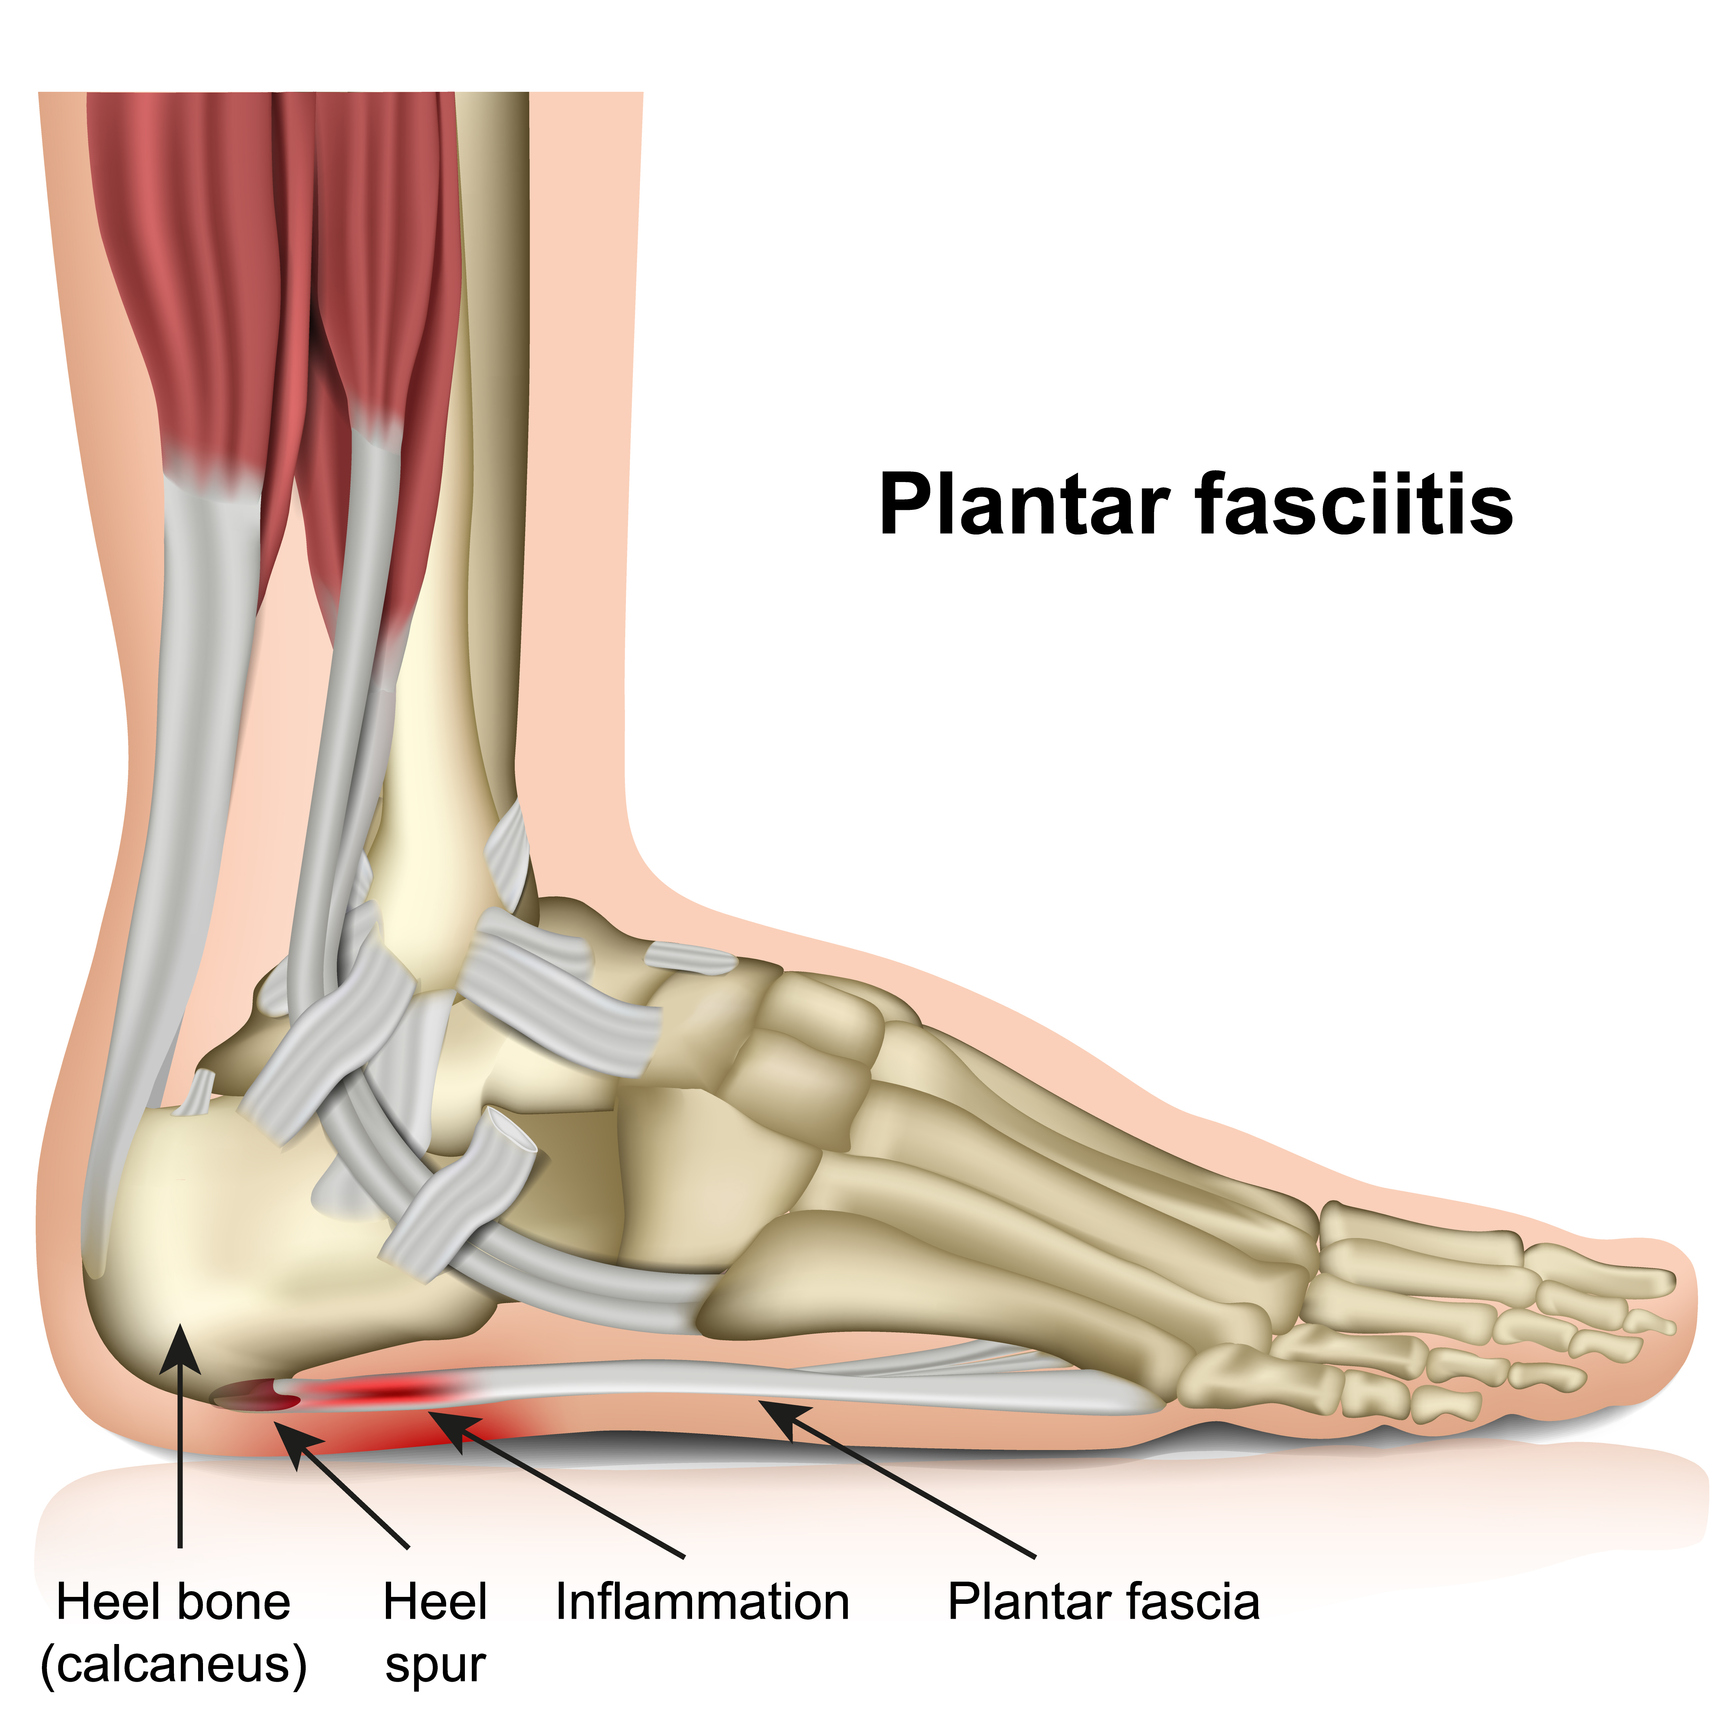 A diagram highlighting plantar fasciitis and the areas it affects.